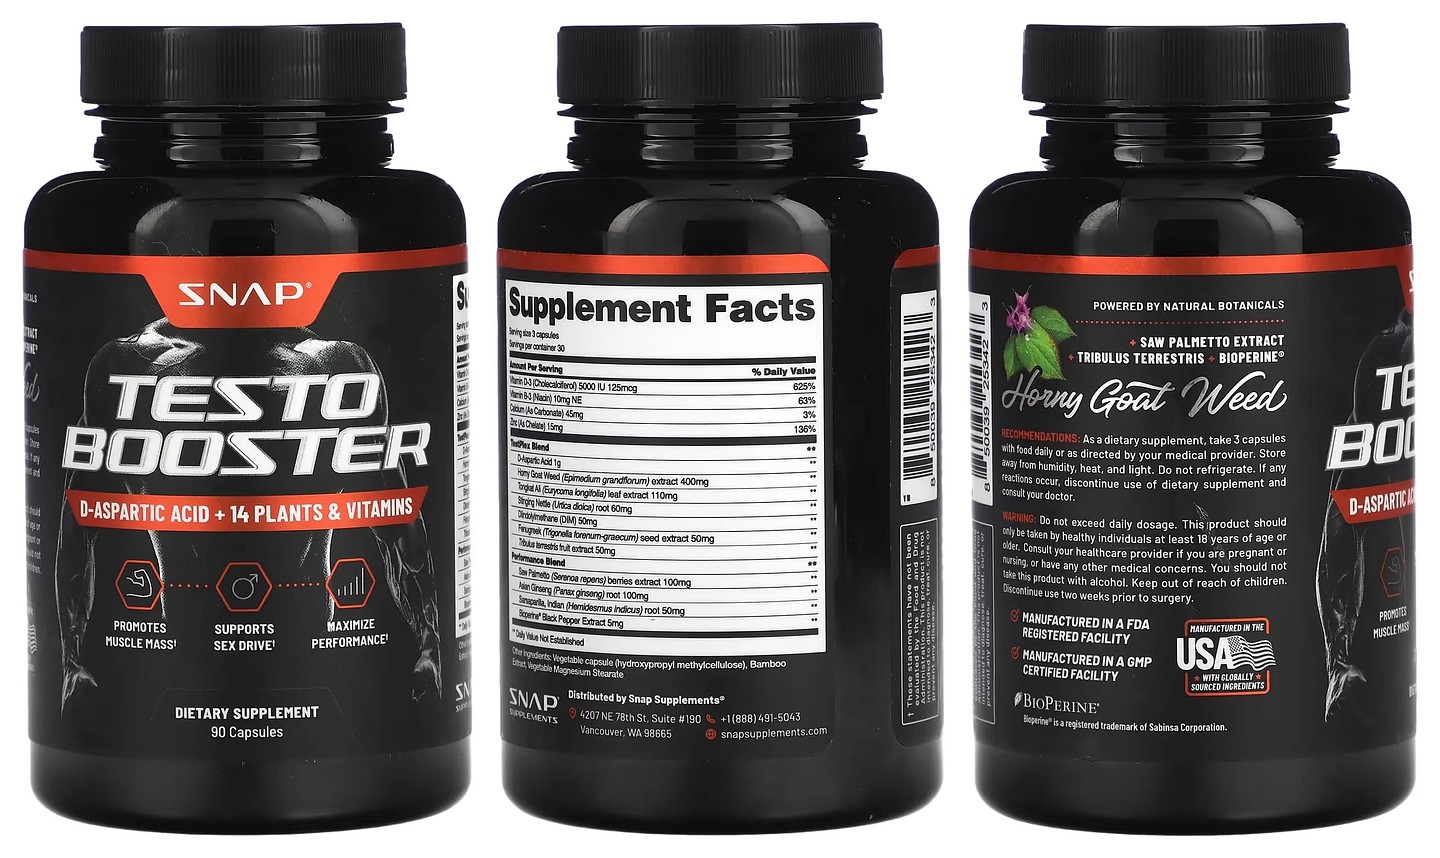 Snap Supplements, Testo Booster packaging